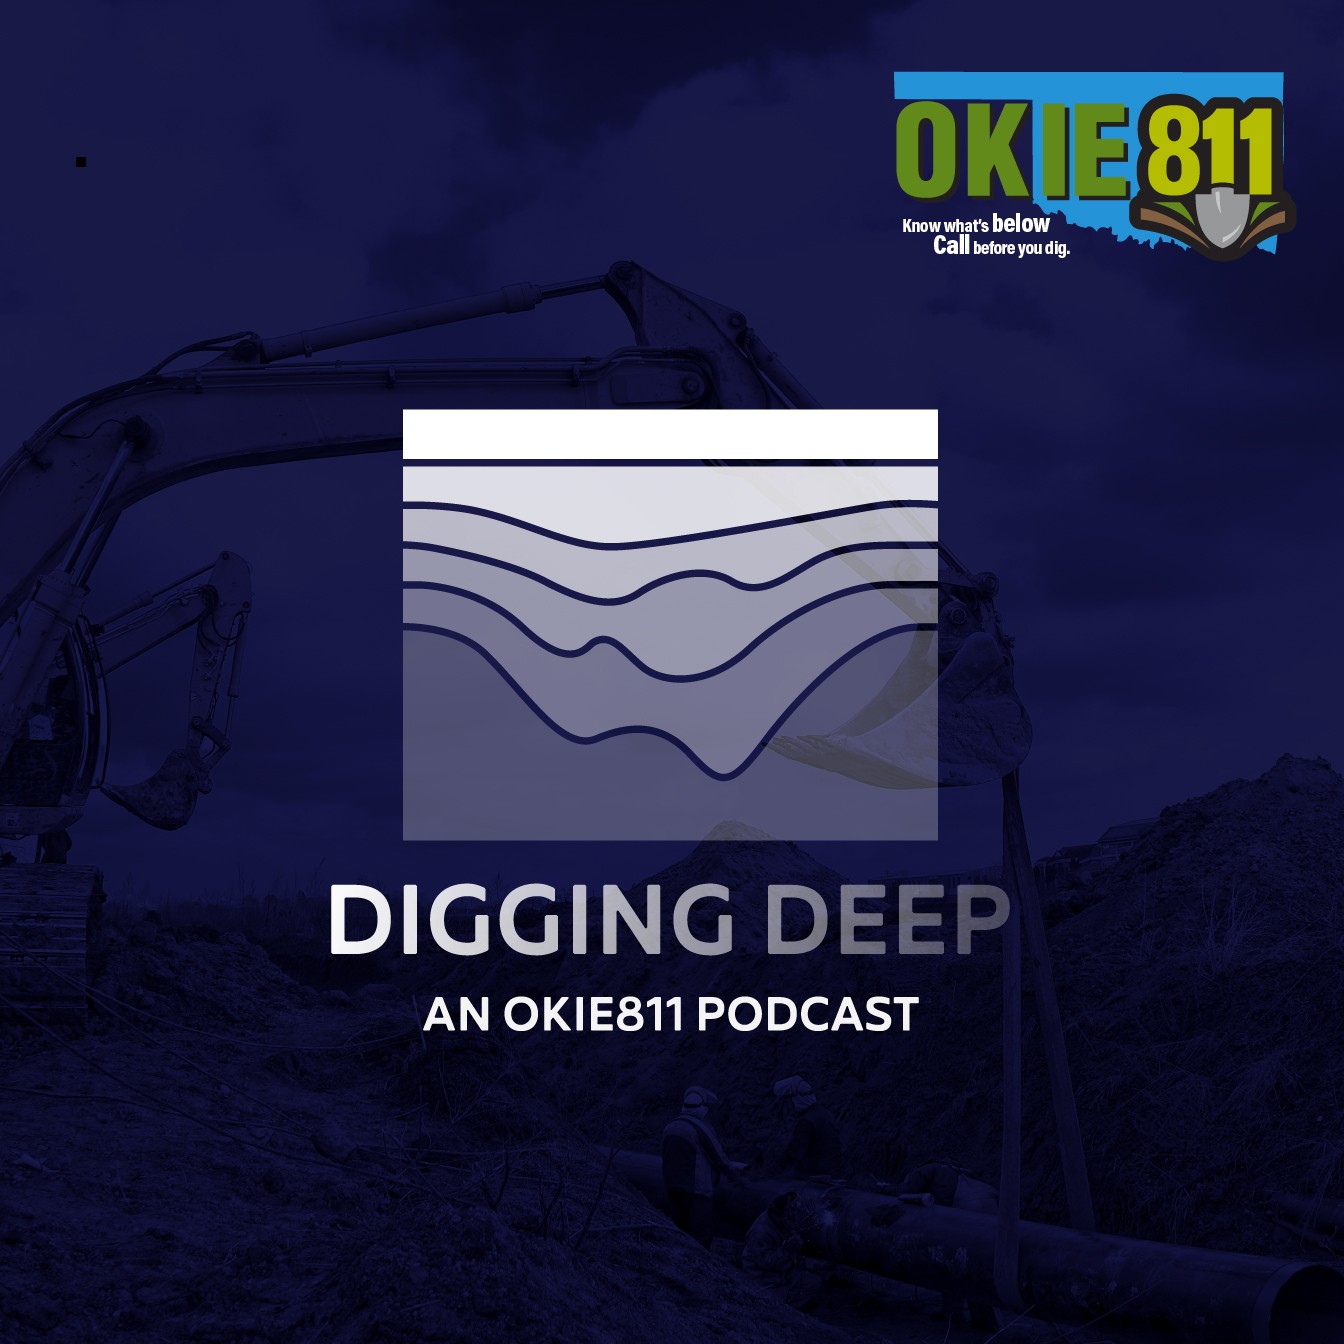 Digging Deep: An OKIE811 Podcast